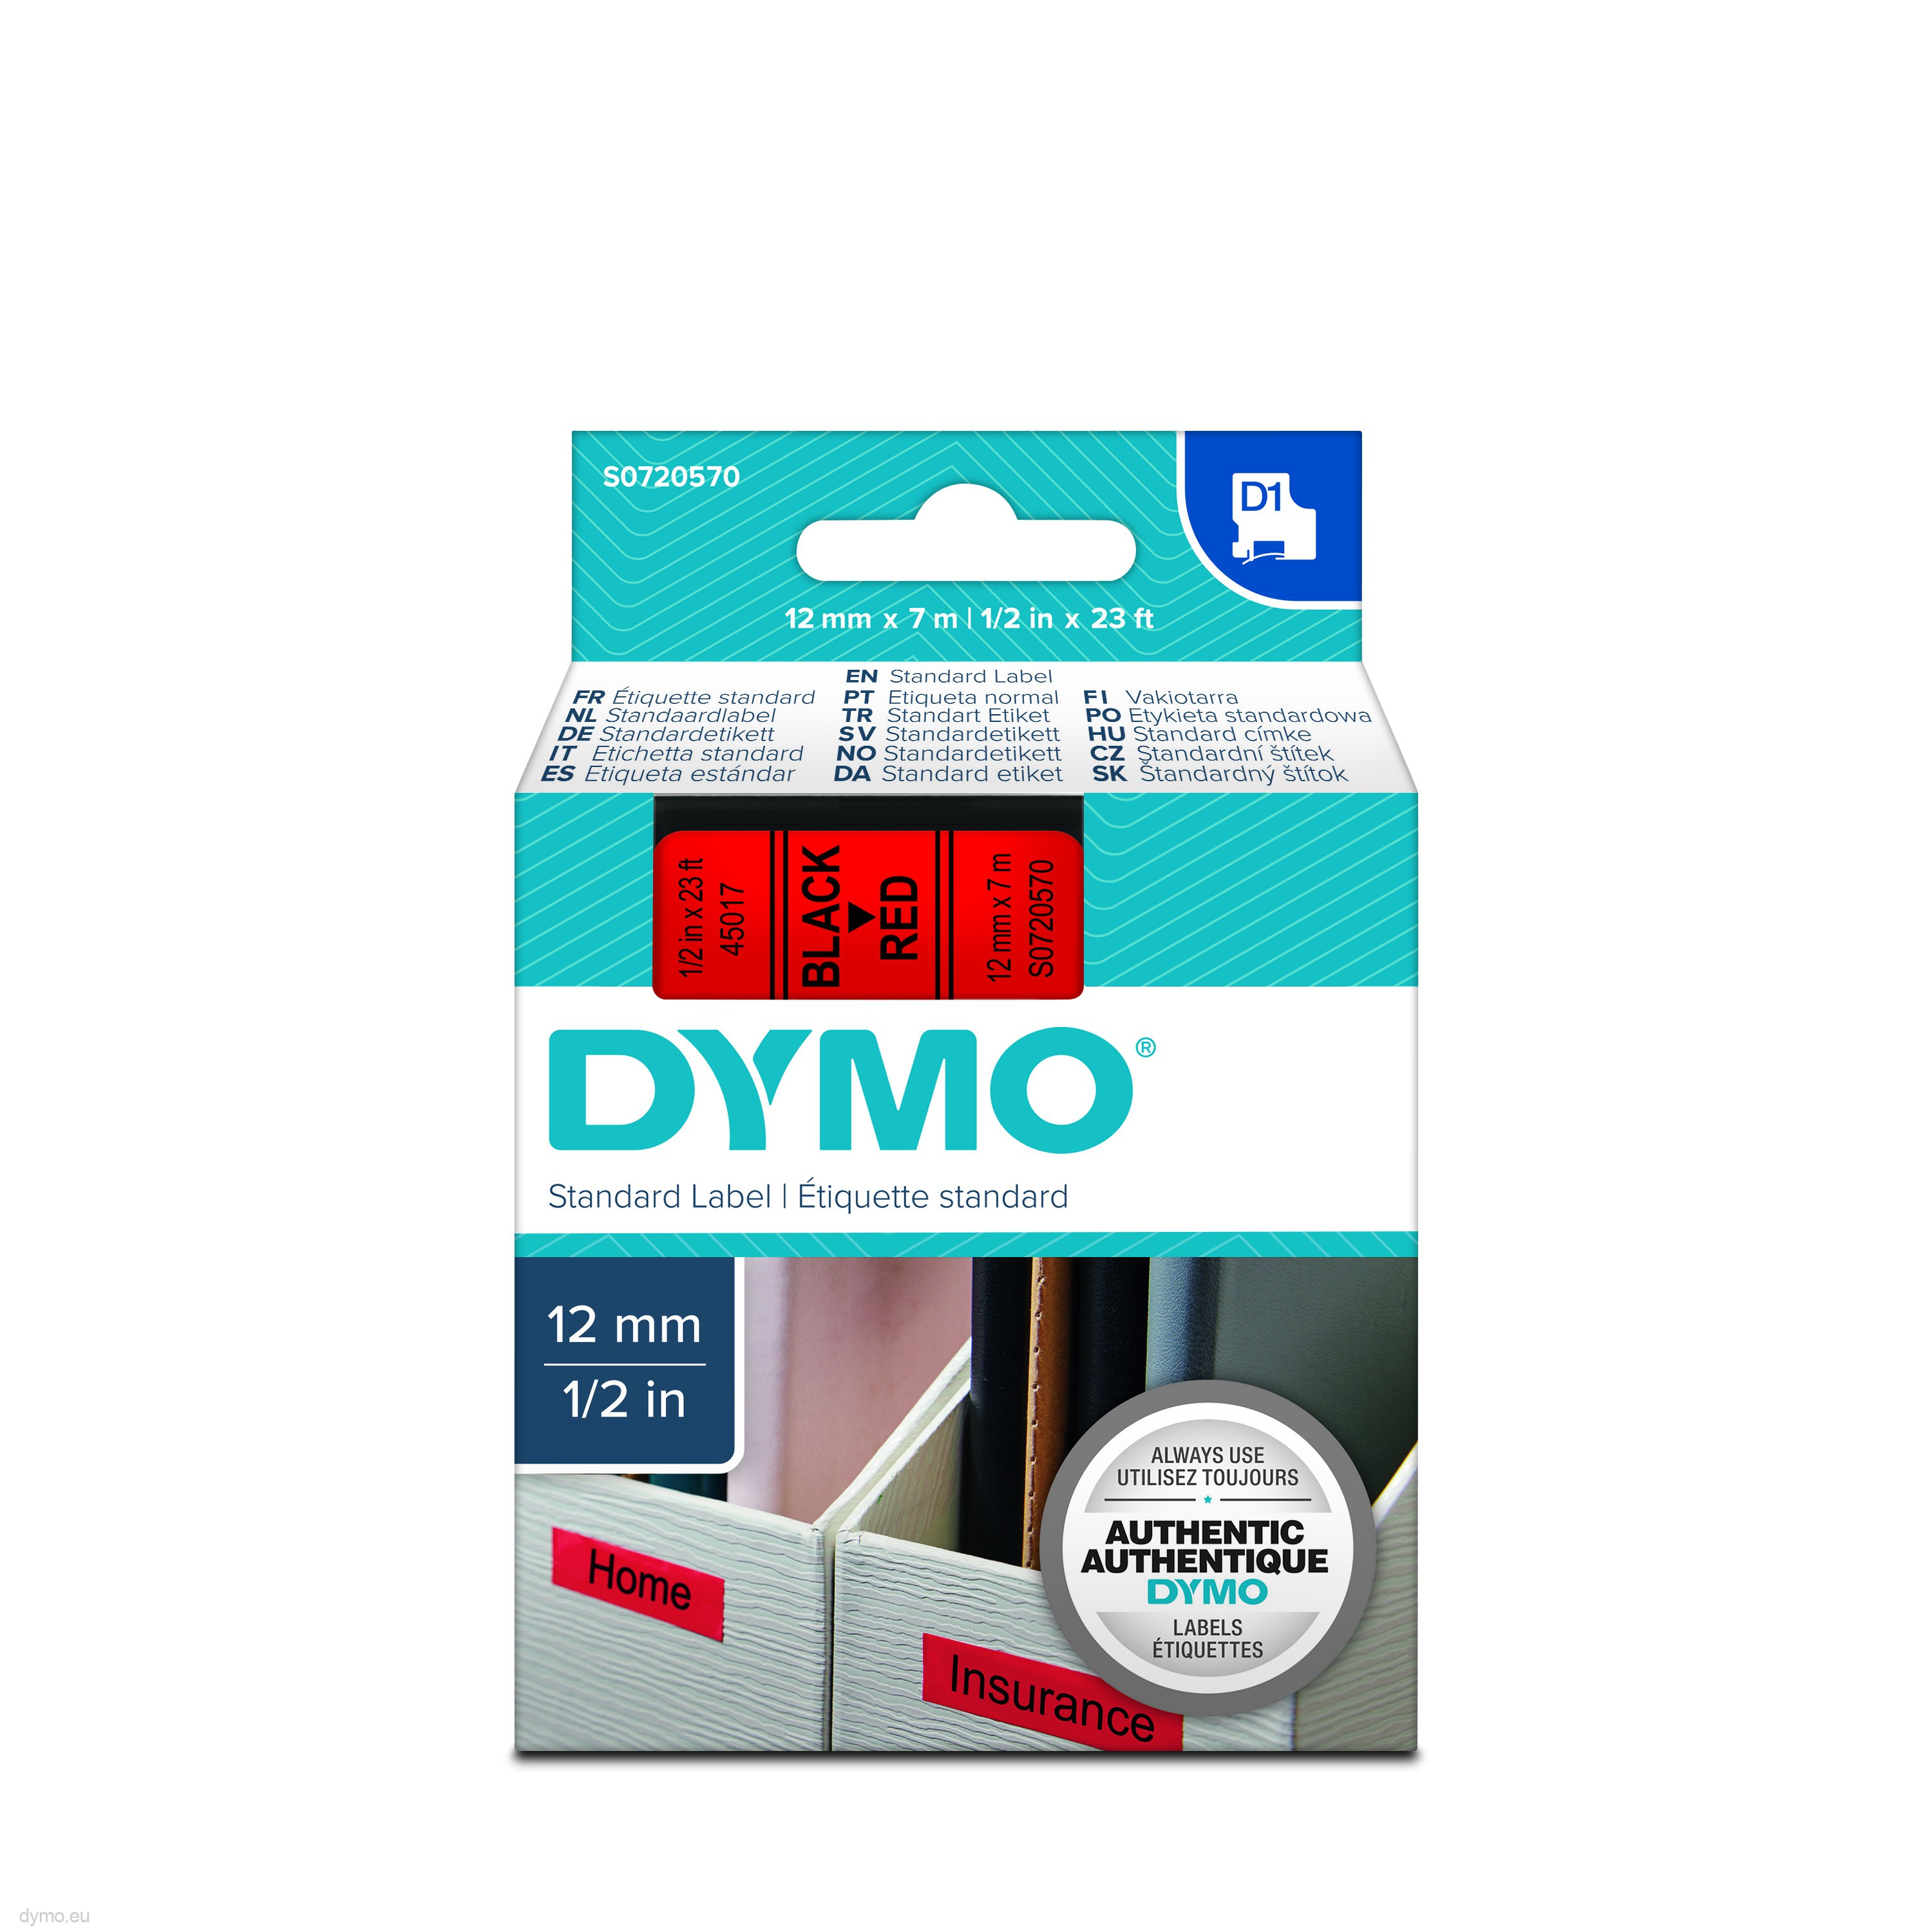 1x Comp Label Tape For Dymo D1 45017 SD45017 Black on Red 12mm x7m LabelManger 